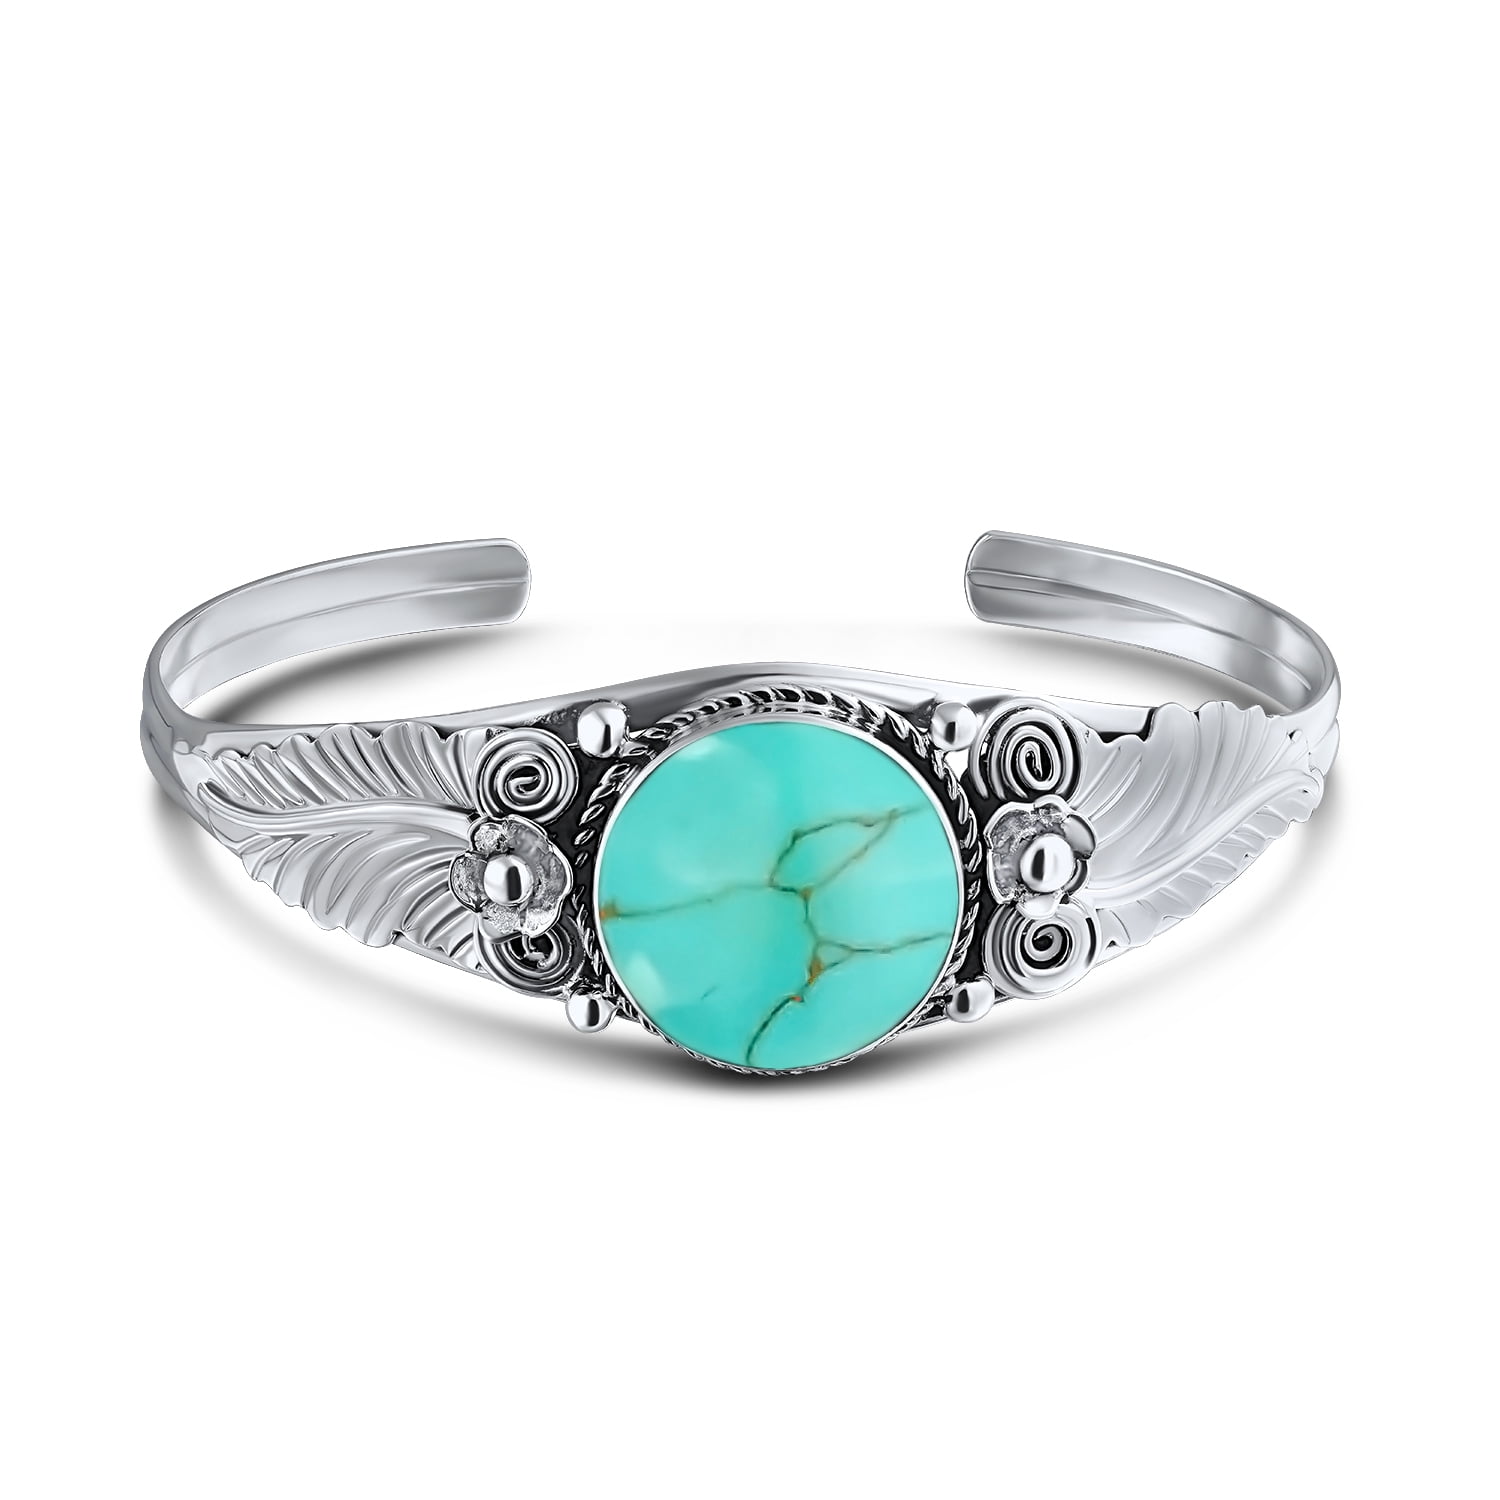 Hypoallergenic jewelry Statement accessory for woman Blue Titanium Cuff Bracelet with Silver and Turquoise